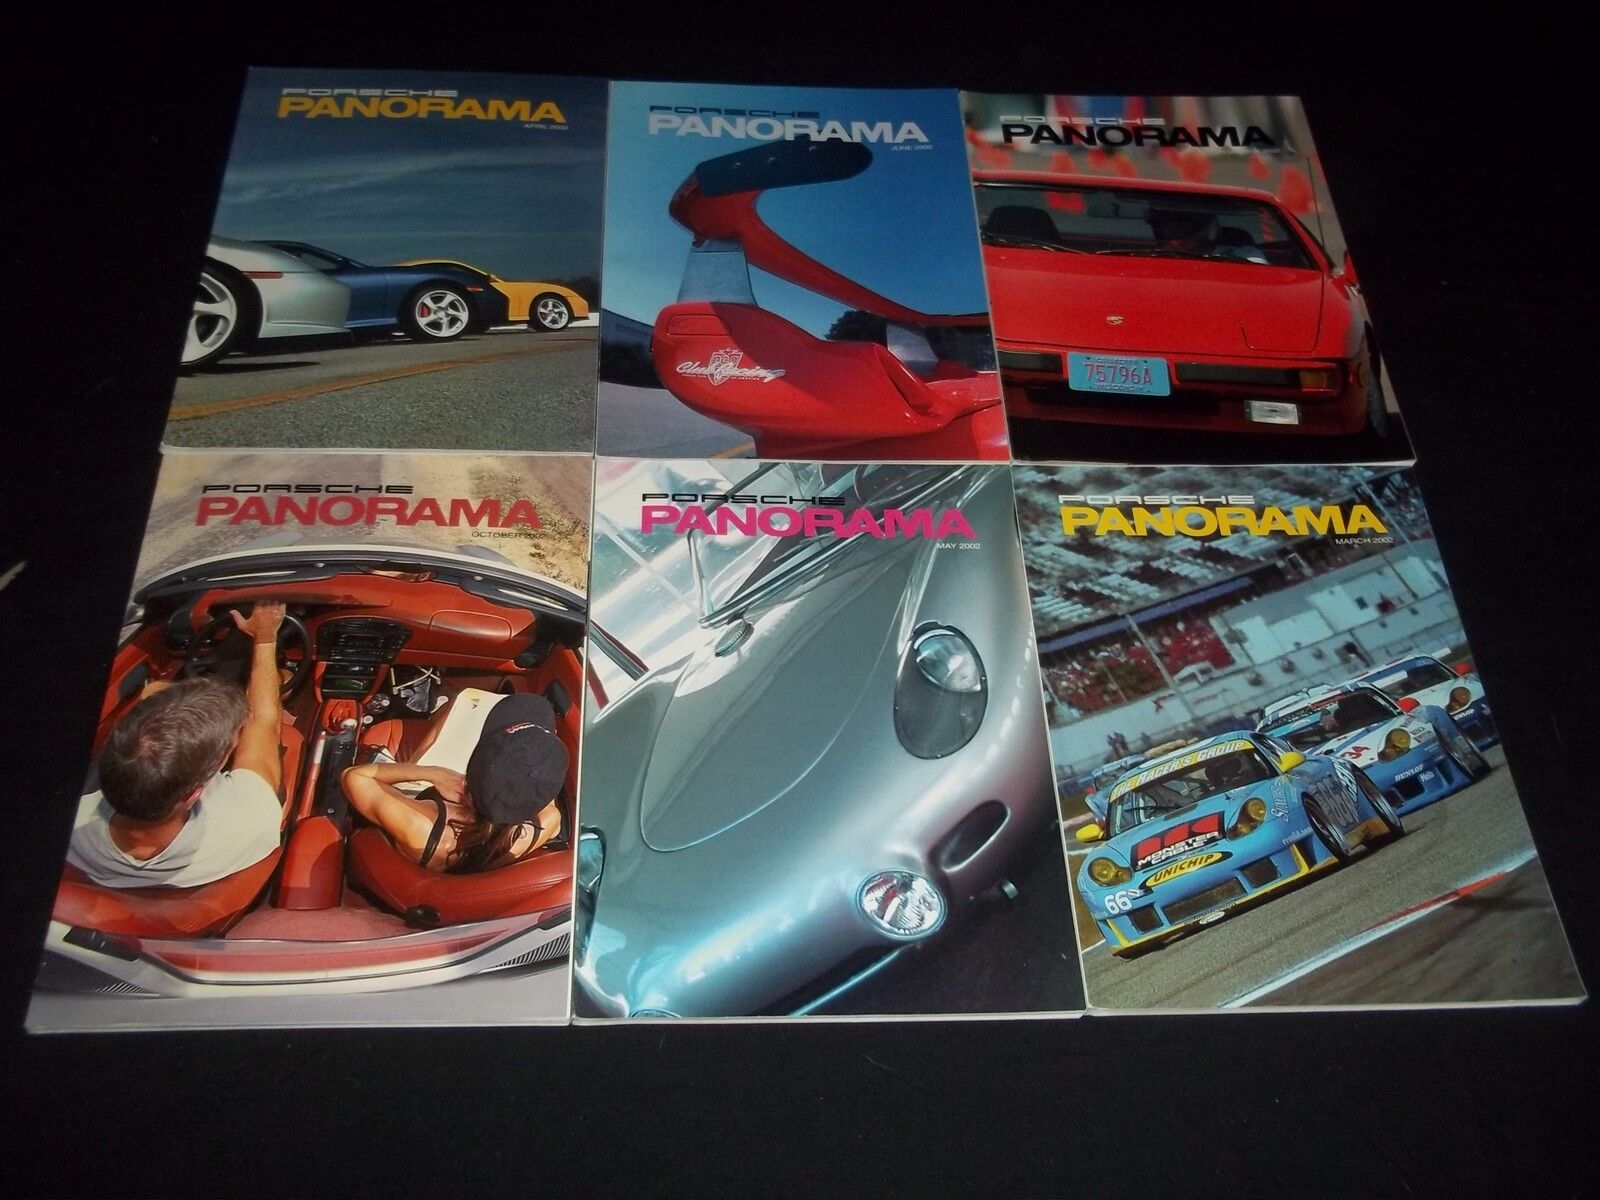 2002 PORSCHE PANORAMA MAGAZINE LOT OF 9 ISSUES - GREAT FAST CAR ISSUES - M 522